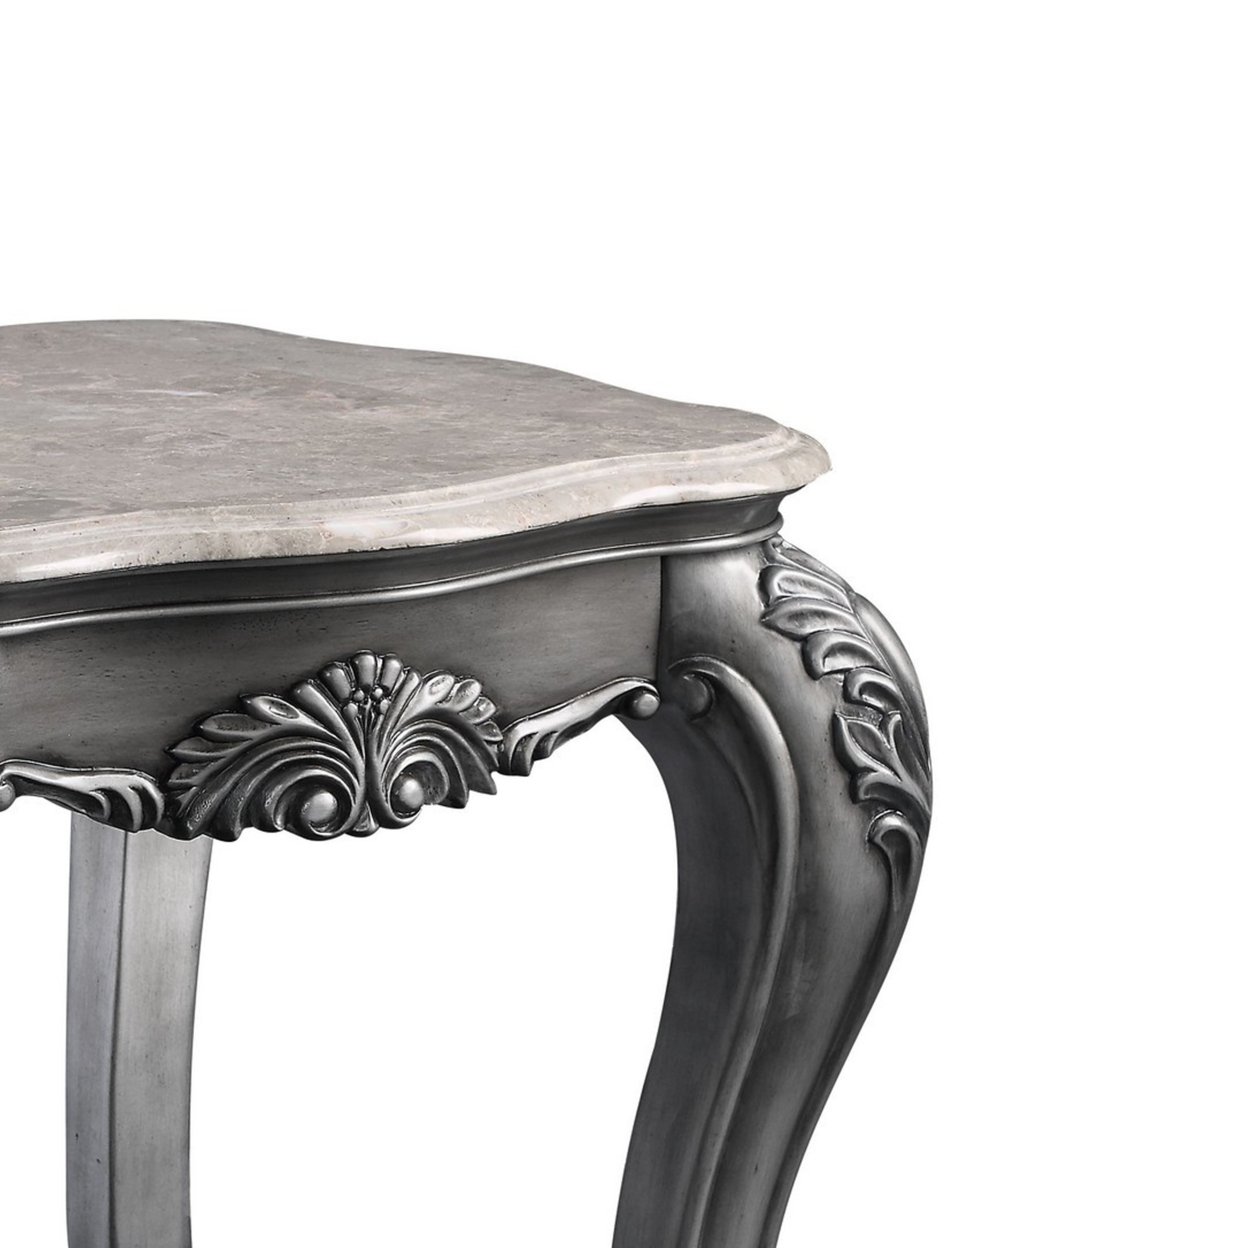 End Table With Marble Top And Queen Anne Legs, Gray- Saltoro Sherpi